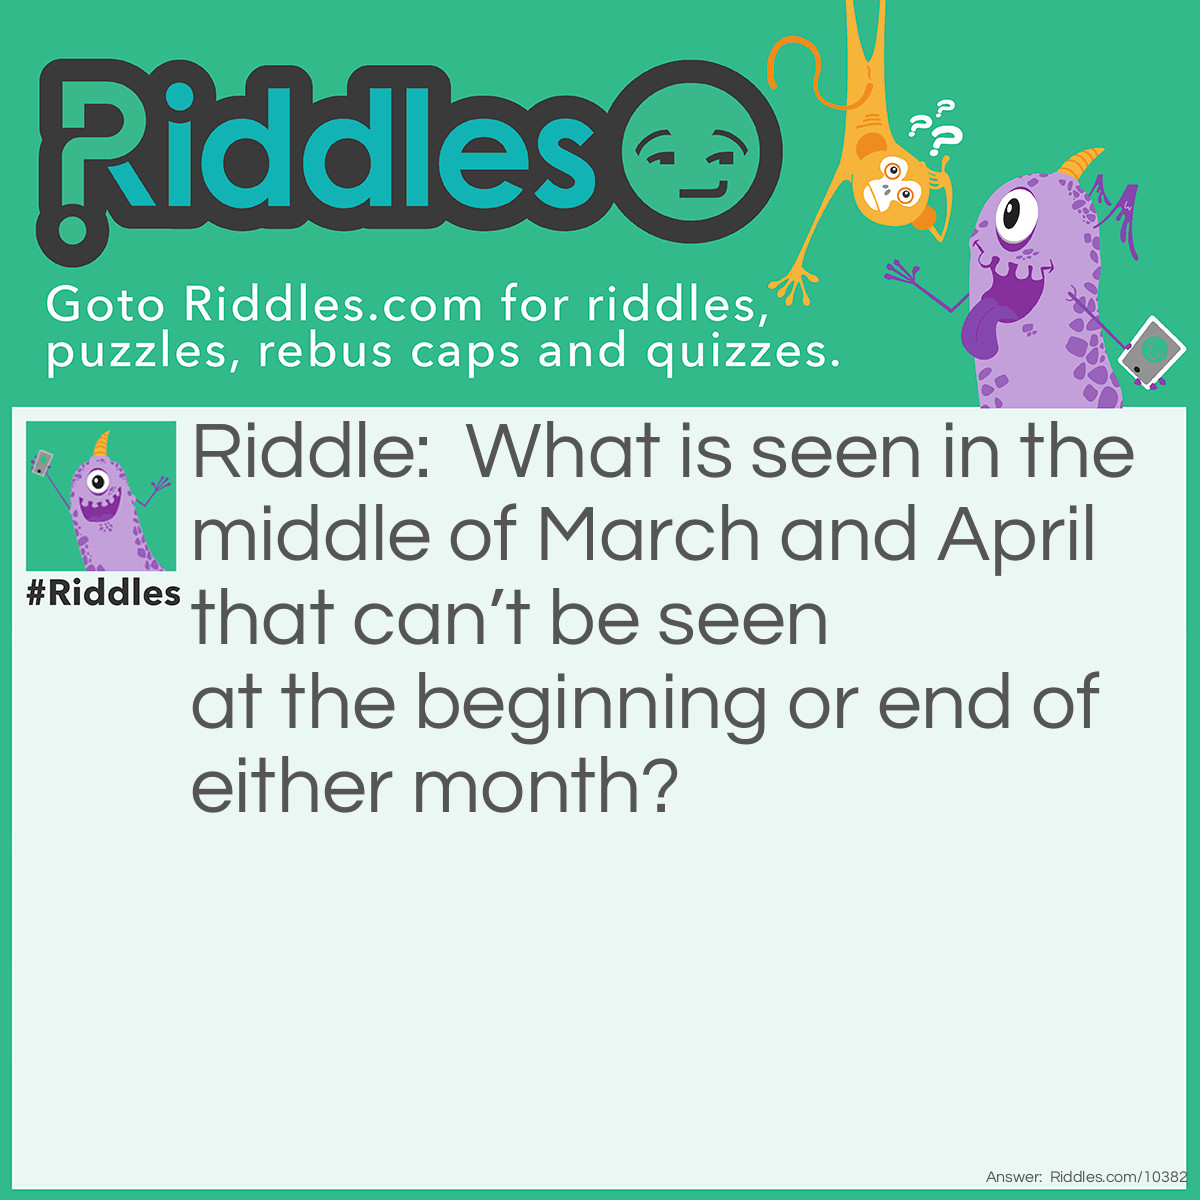 Riddle: What is seen in the middle of March and April that can’t be seen at the beginning or end of either month? Answer: The letter R.